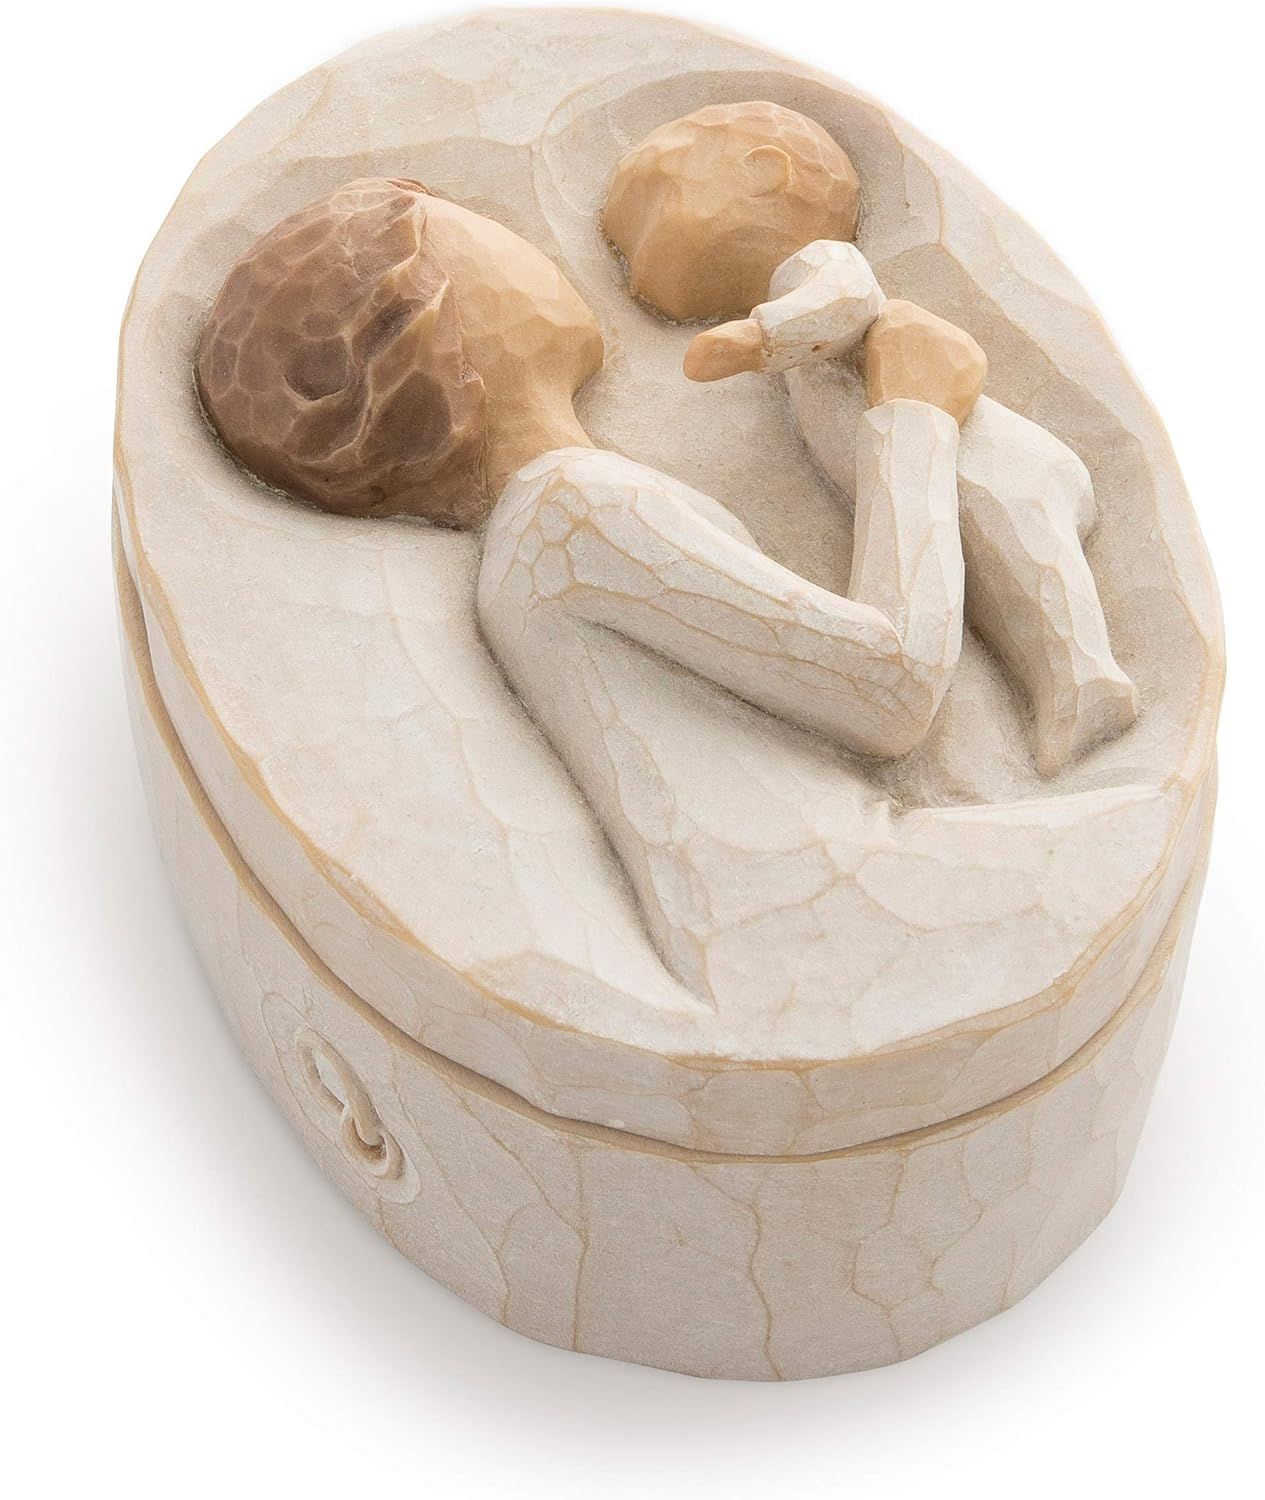 Willow Tree Grandmother, sculpted hand-painted keepsake box | Amazon (US)